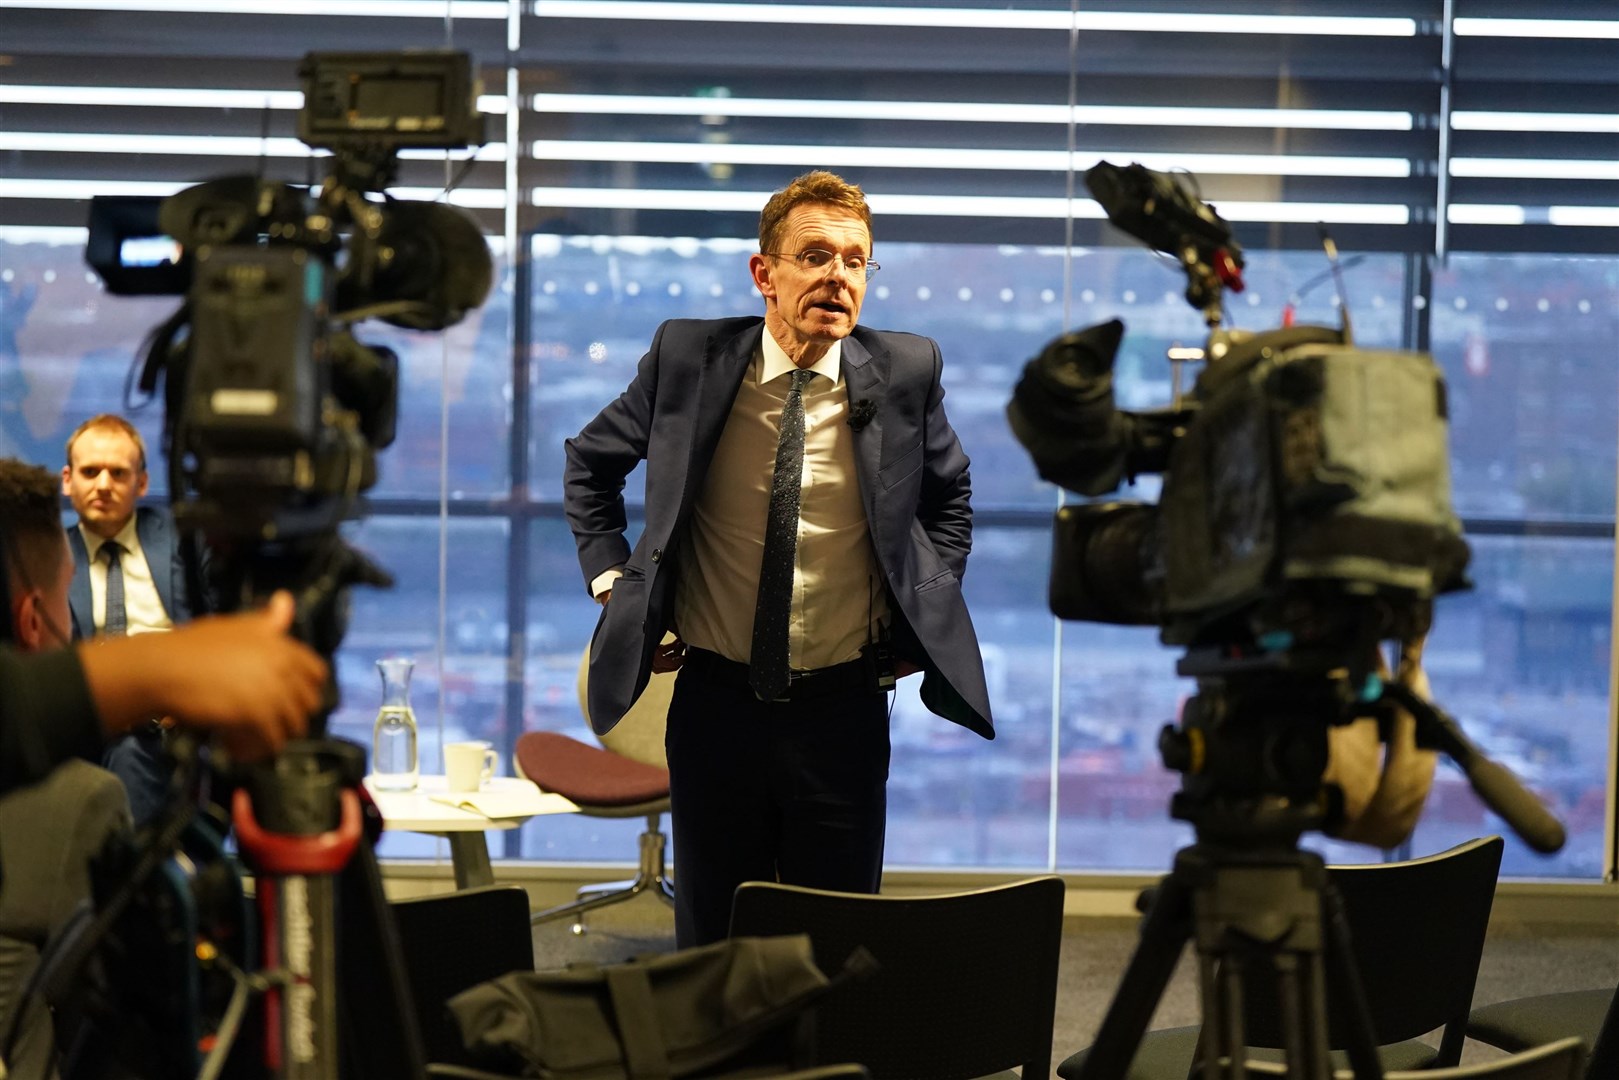 Conservative mayor of the West Midlands Andy Street speaking to the media (Jacob King/PA)